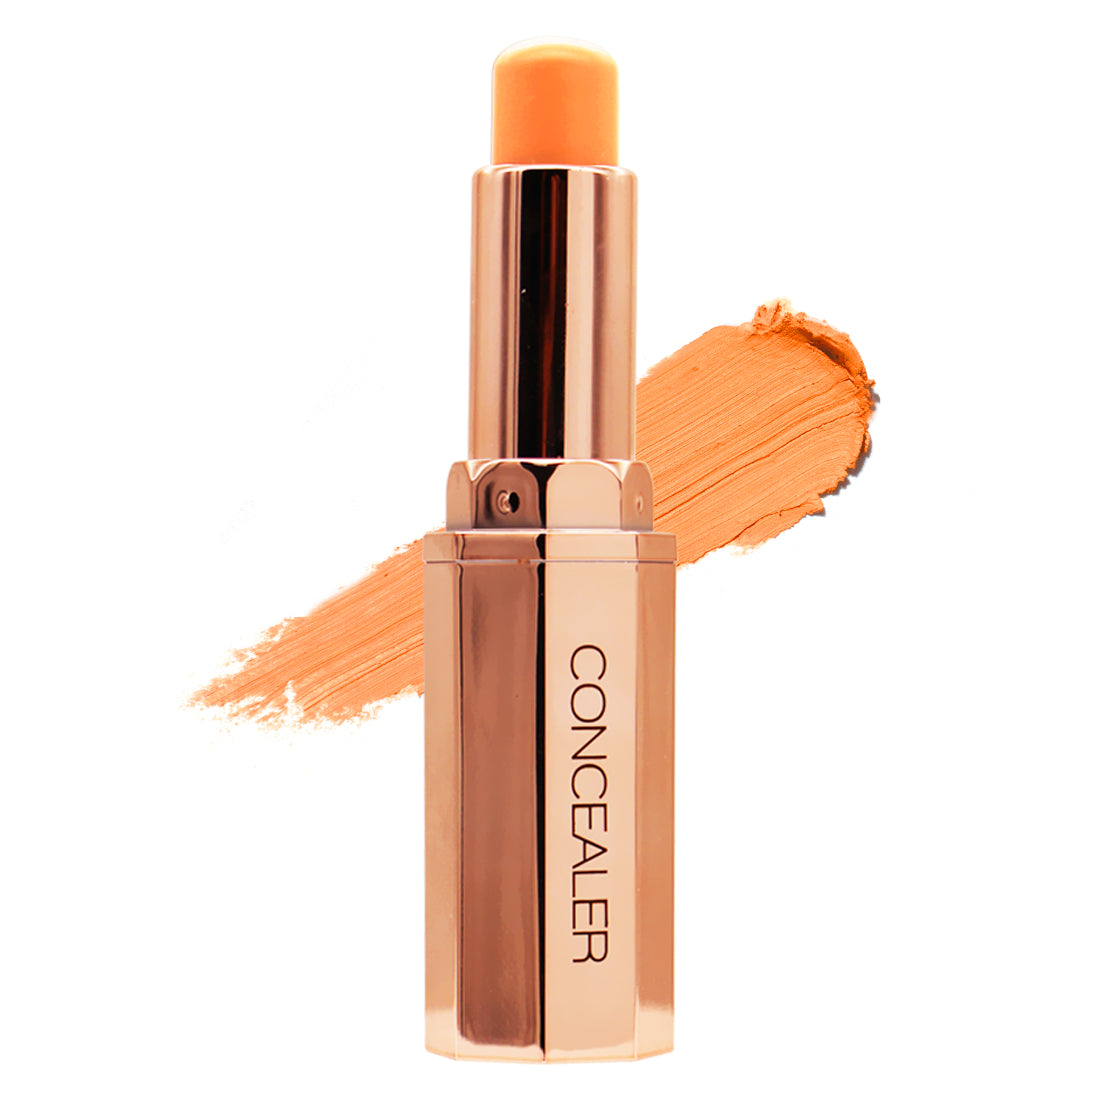 FASHION COLOUR Concealer | Creamy Concealer Stick | Weightless | Smooth Texture | Full Coverage Concealer |Buildable| Covers Blemishes & Hides Dark Circles | 3.8g